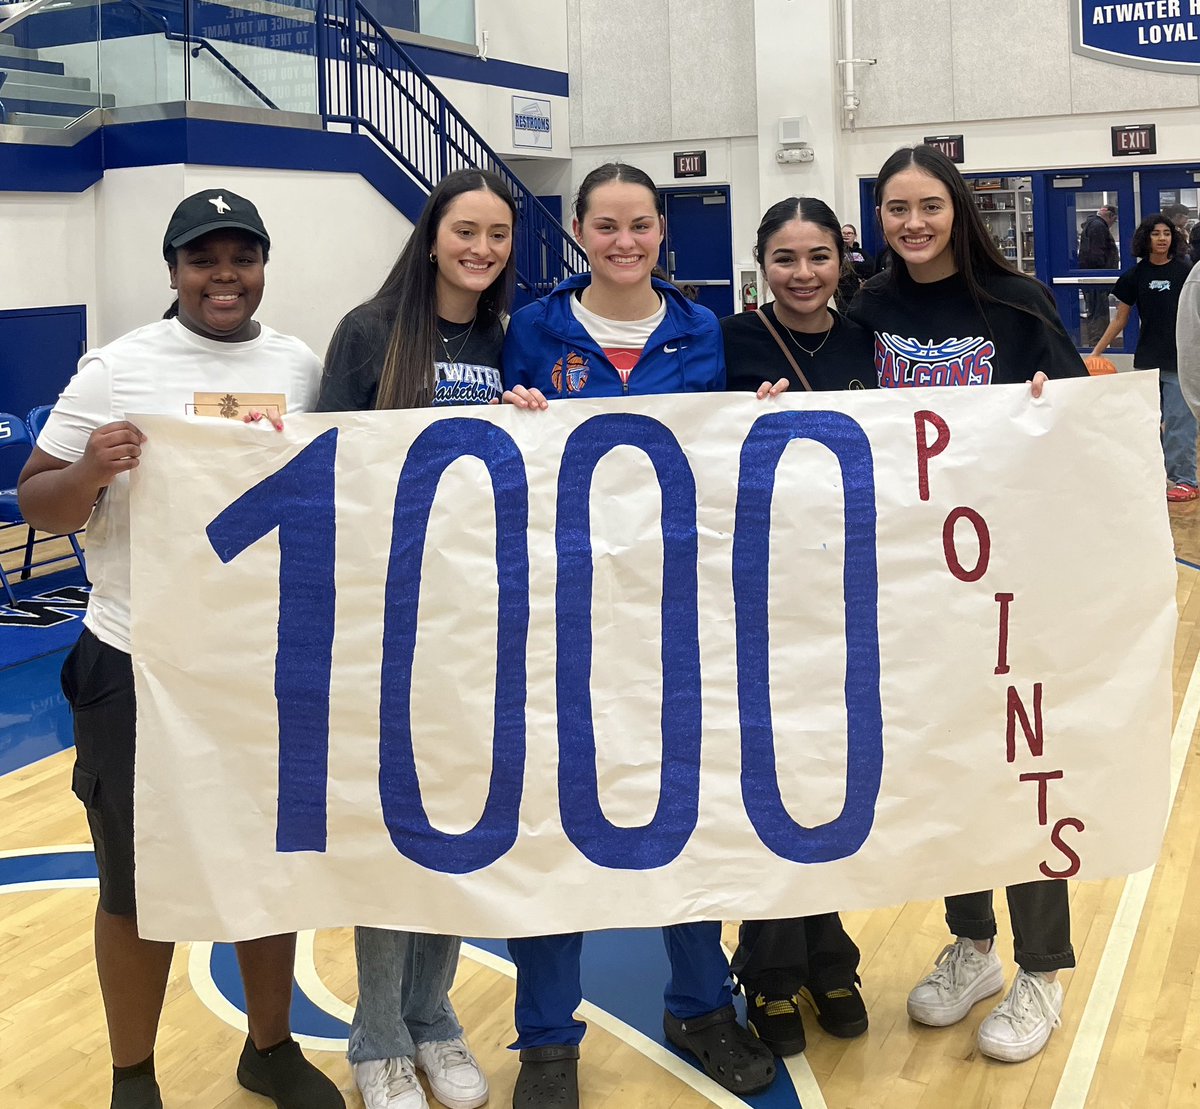 Welcome to The Club Rook! The five ladies to have scored a 1,000 points under Coach Davis. Amoni Claiborne, Lexi Valencia, Karissa Hukill, Ailene Lopez, Kelsey Valencia. 🎀🐦🏀🔵⚪️🔴 #1000PointClub